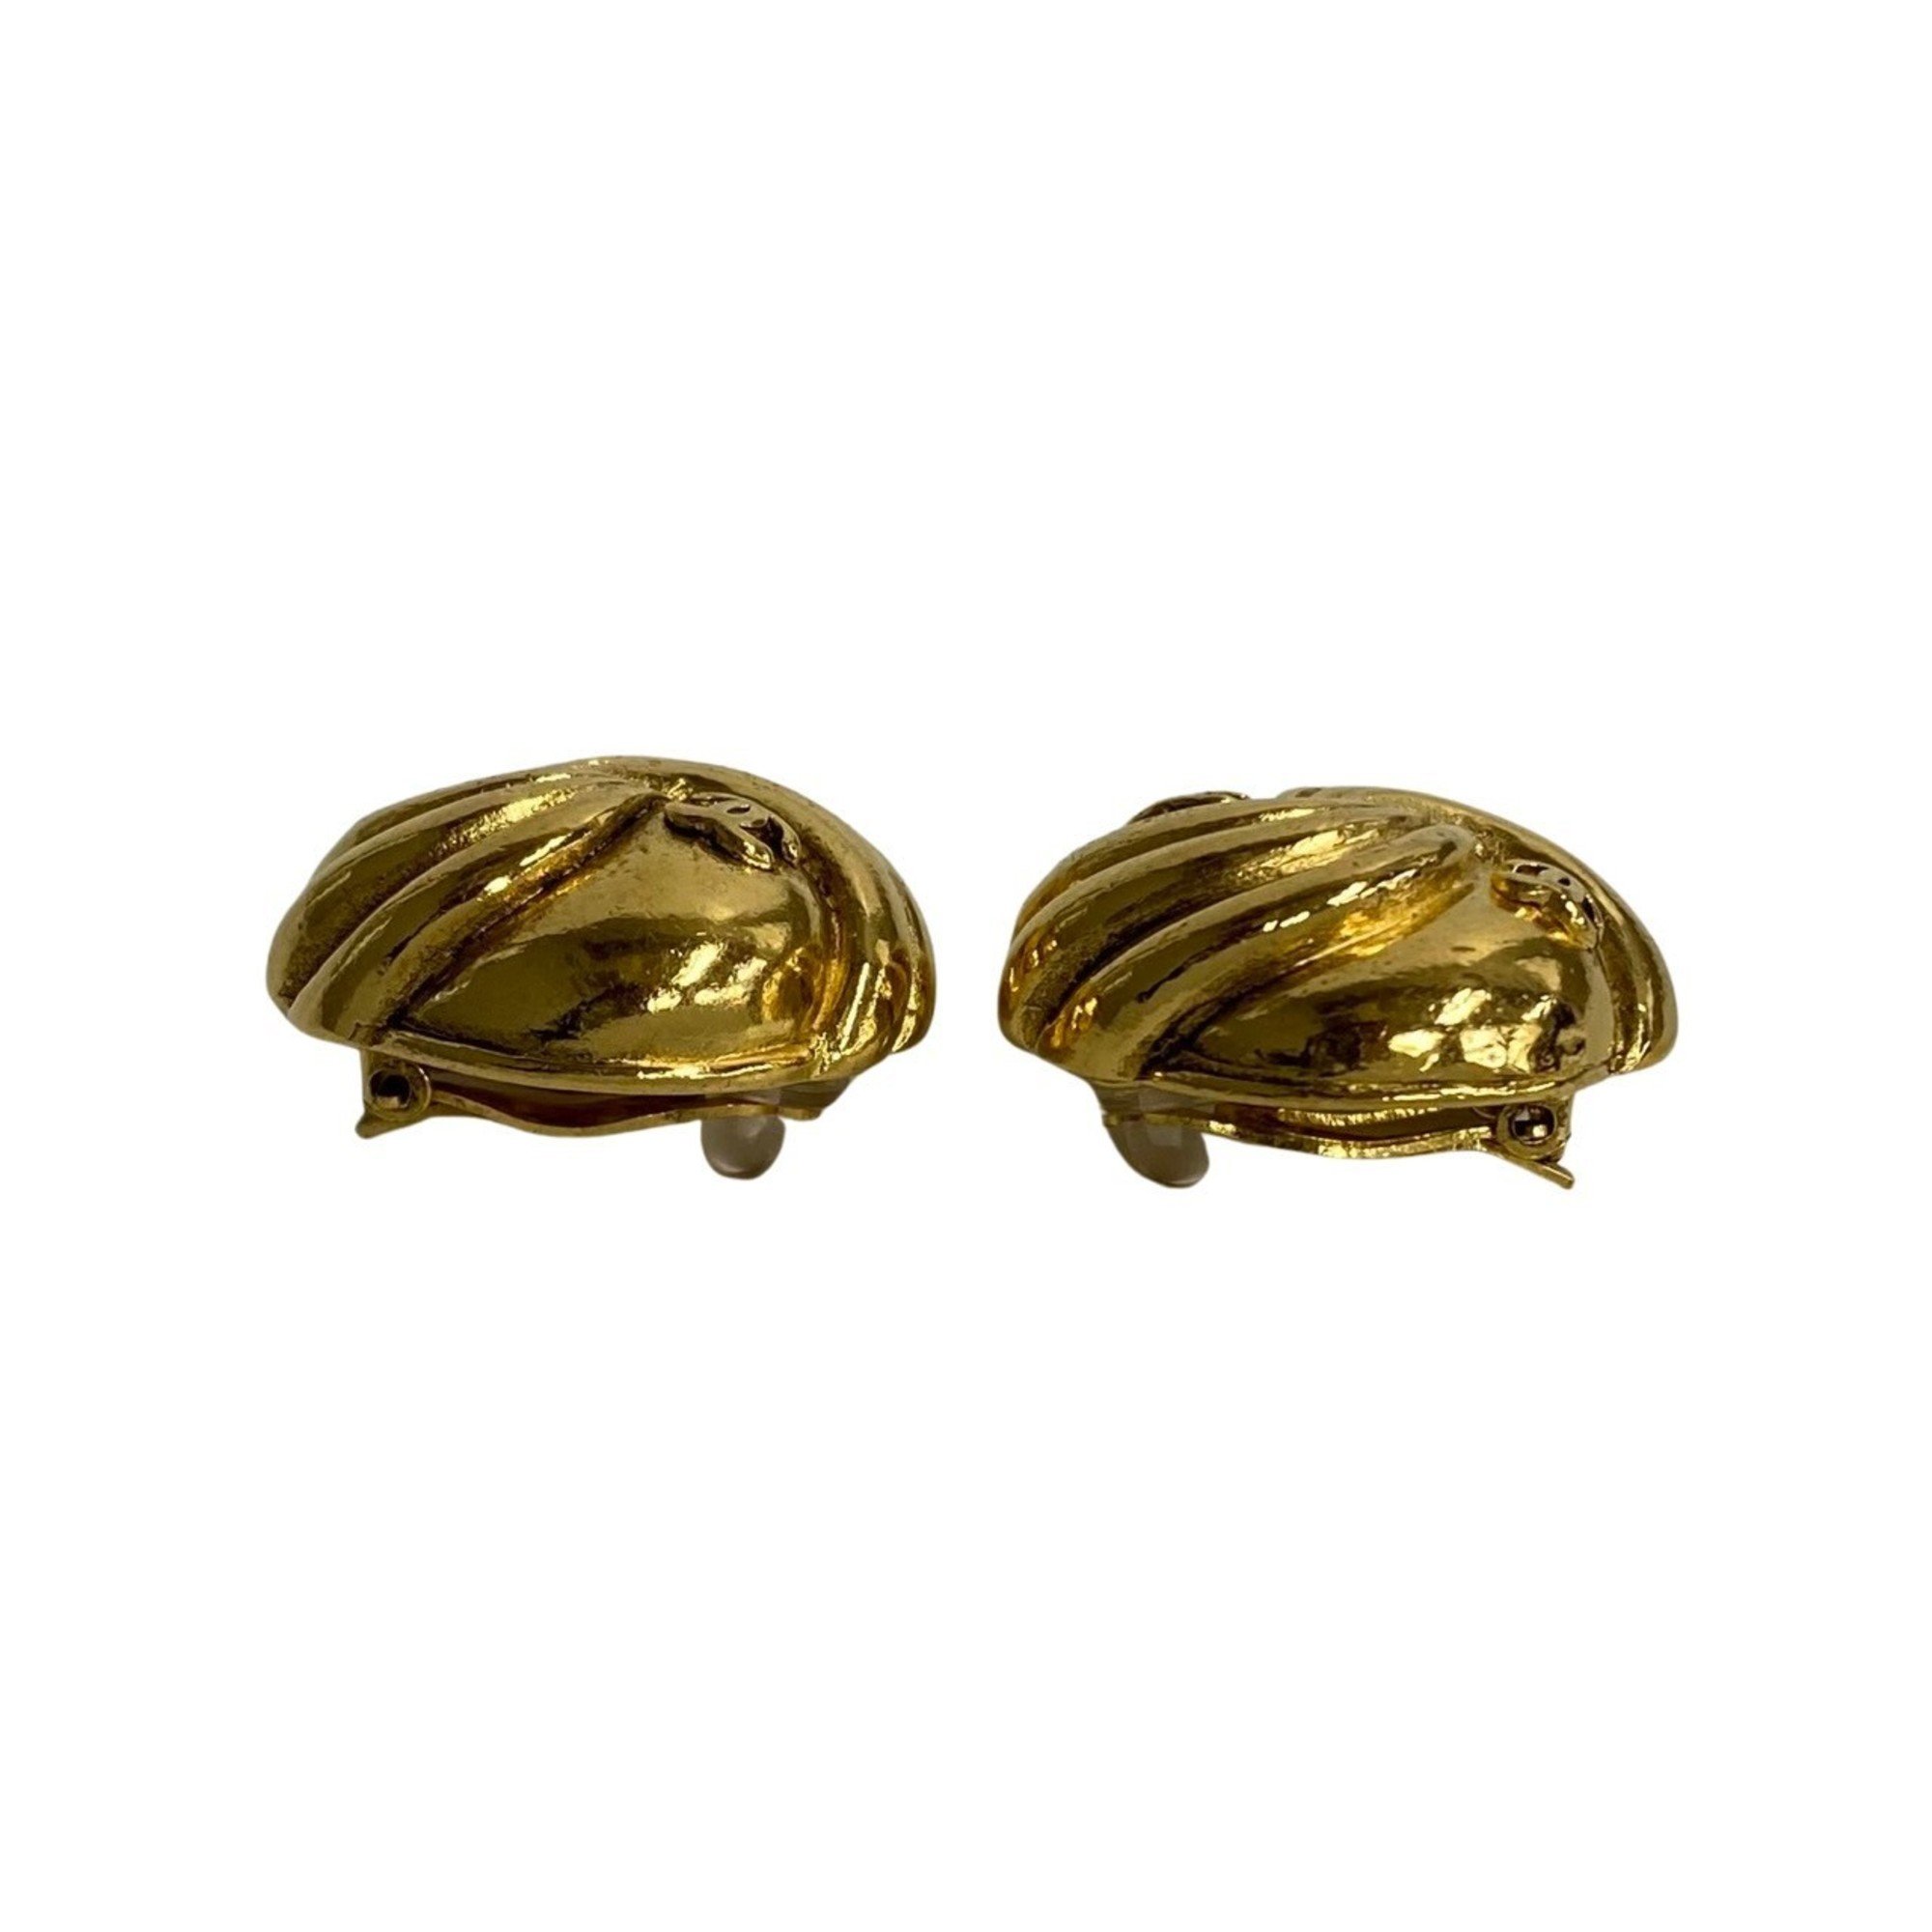 CHANEL Coco Mark Motif Earrings and Ear Cuffs for Women, Gold, 23588